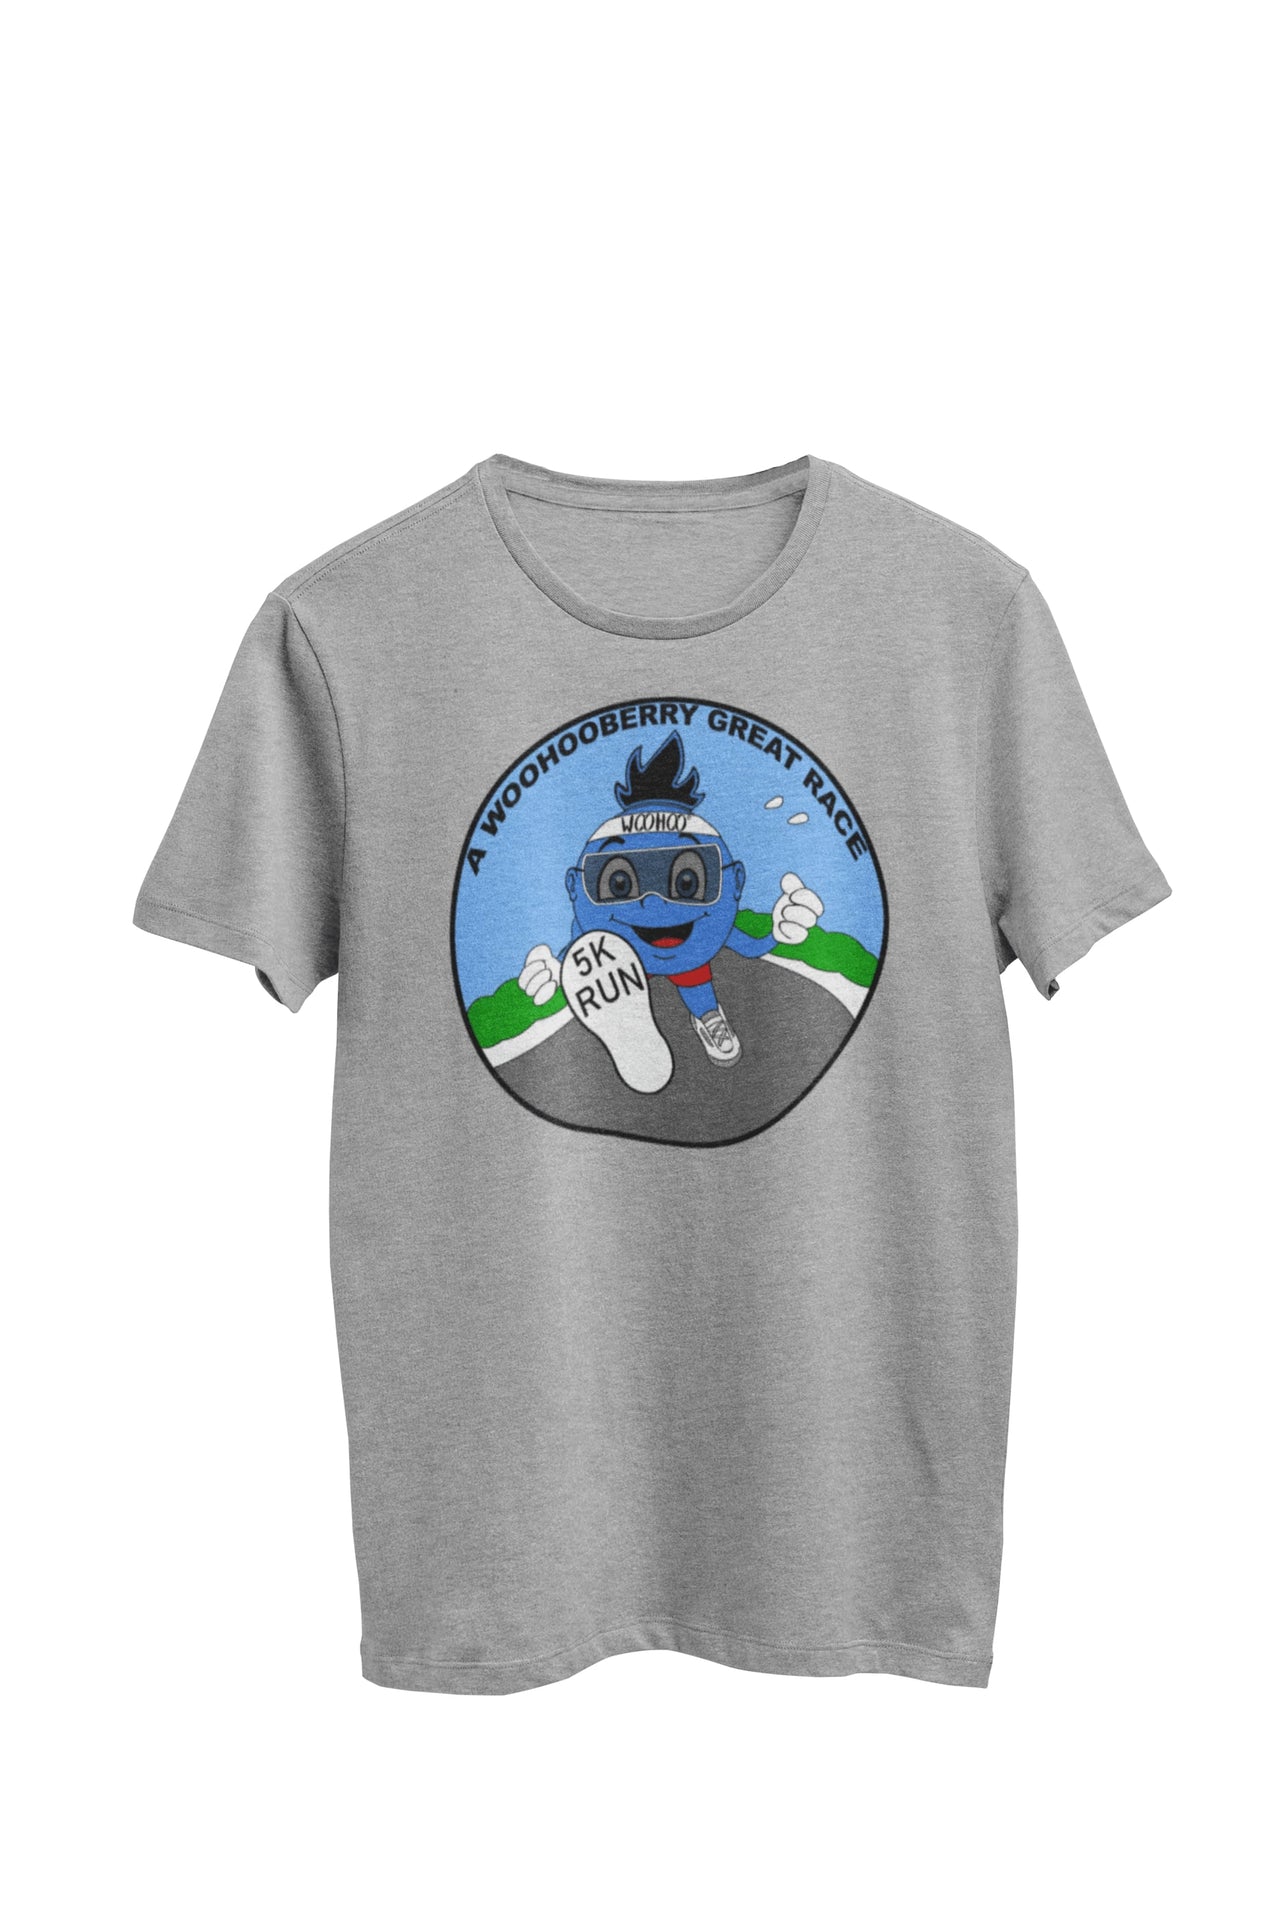 WooHooBerry participating in a 5K race, tee says 'A WooHooBerry Great Race' with '5K' and sporting a sweatband that reads'WooHoo' inscribed. The gray T-shirt contributes to the energetic and determined vibe of the event.